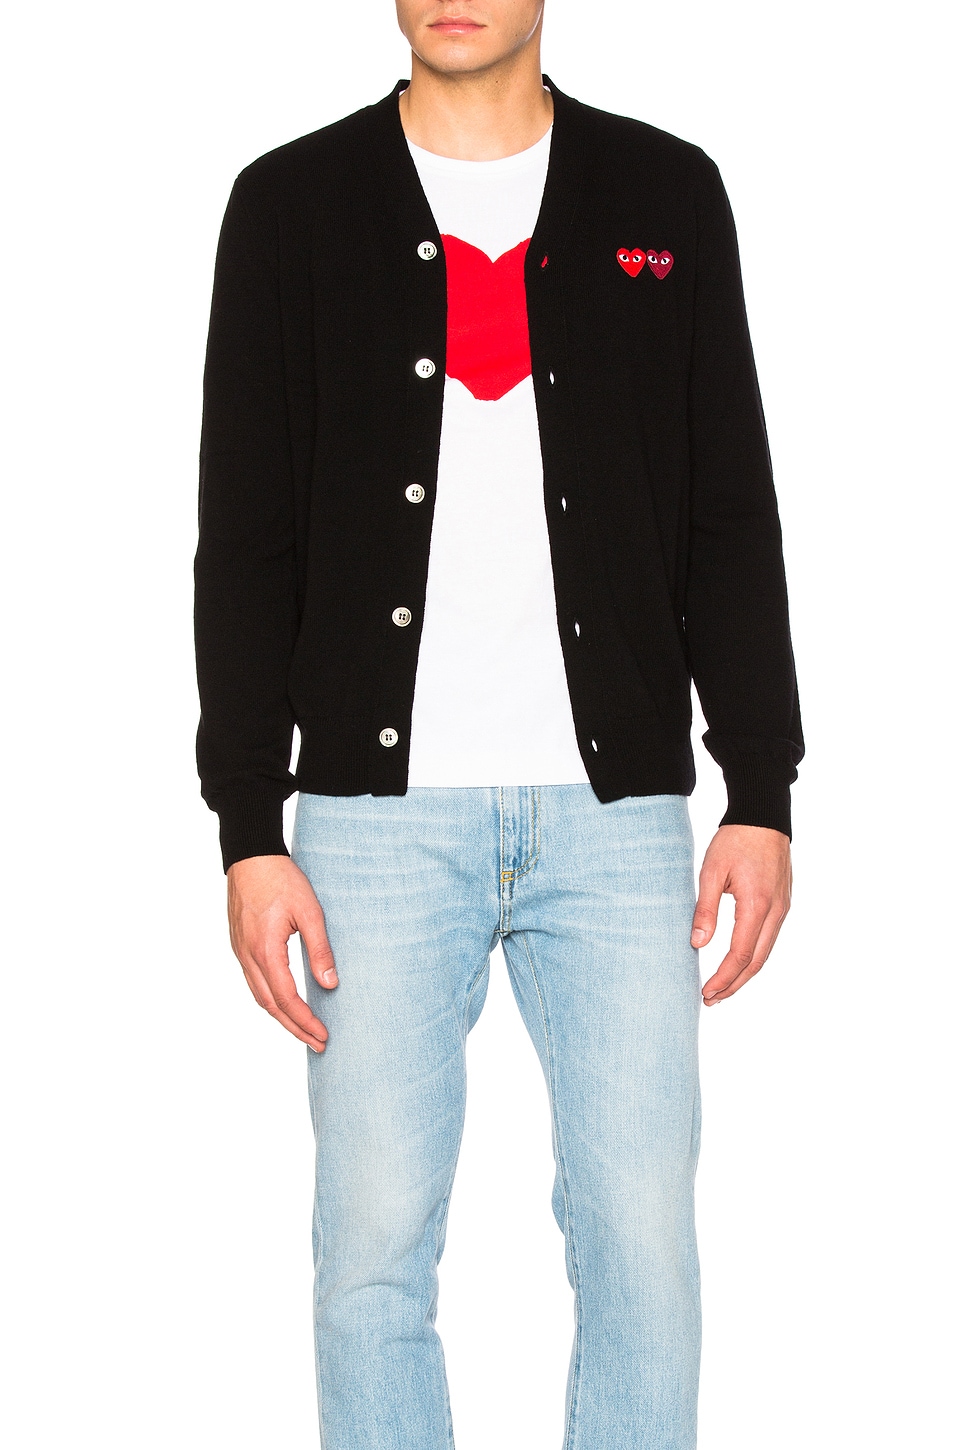 Image 1 of COMME des GARCONS PLAY Double Emblem Cardigan in Black